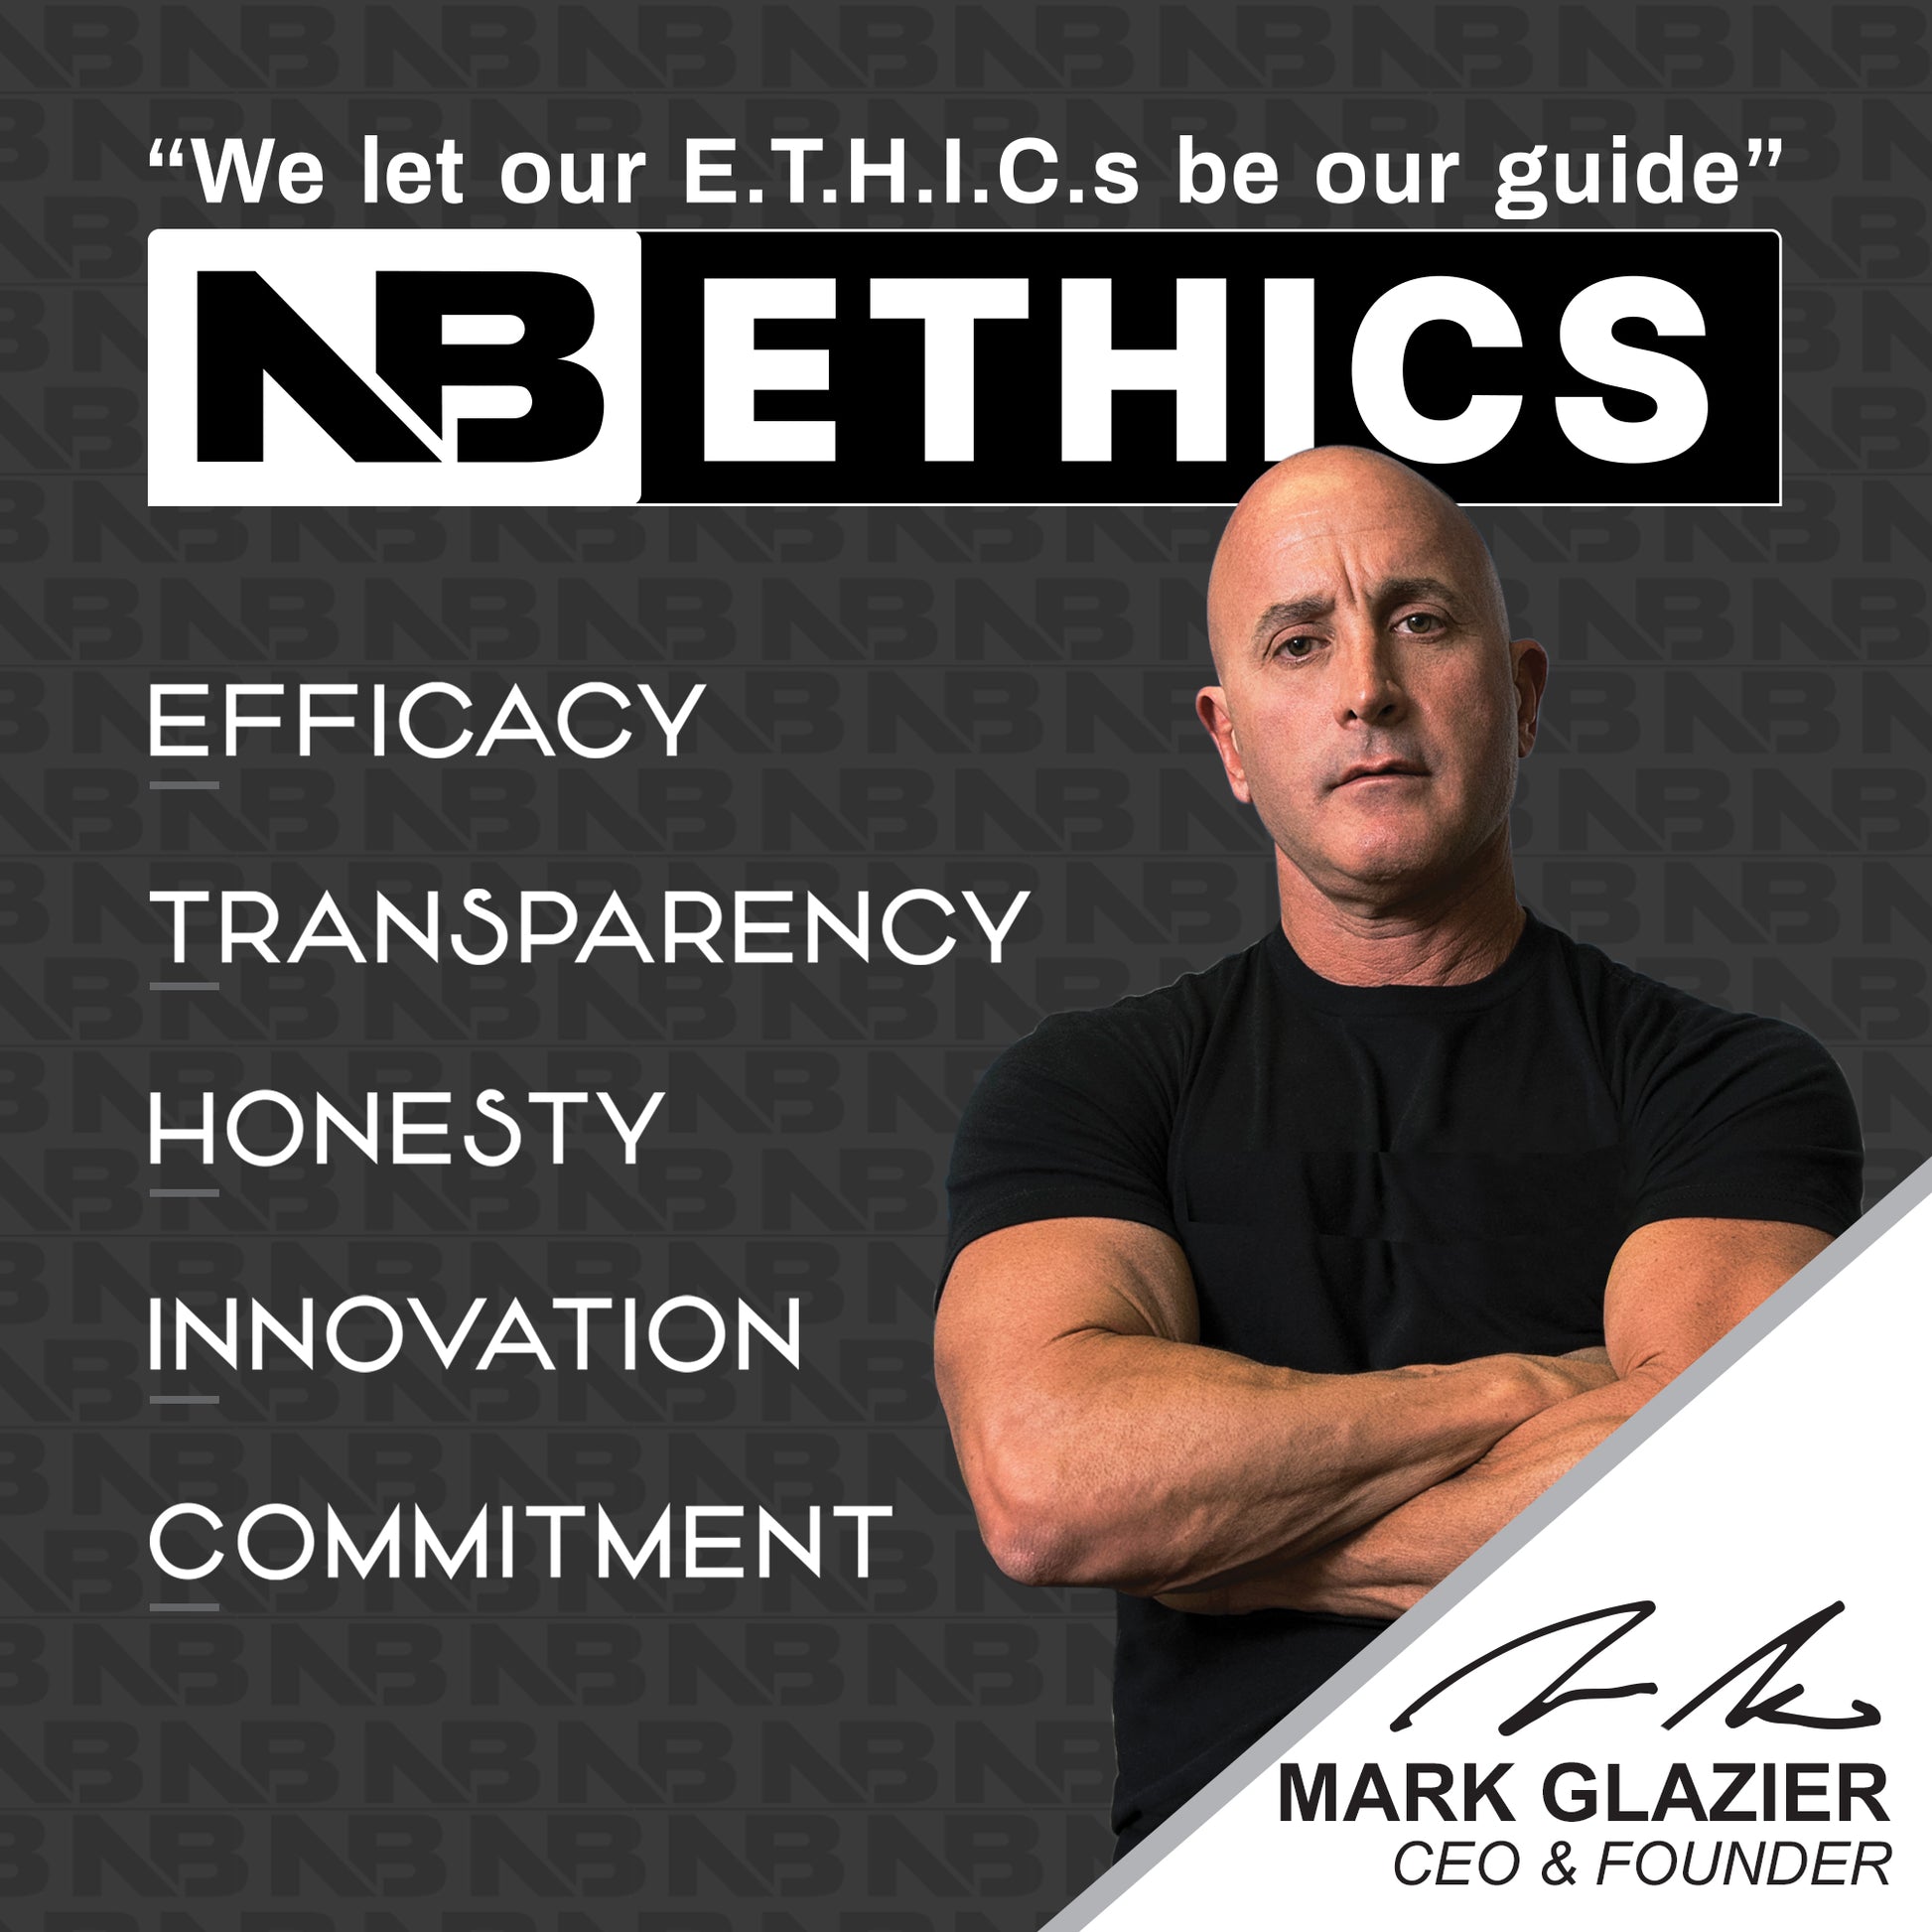 Mark Glazier Founder and CEO